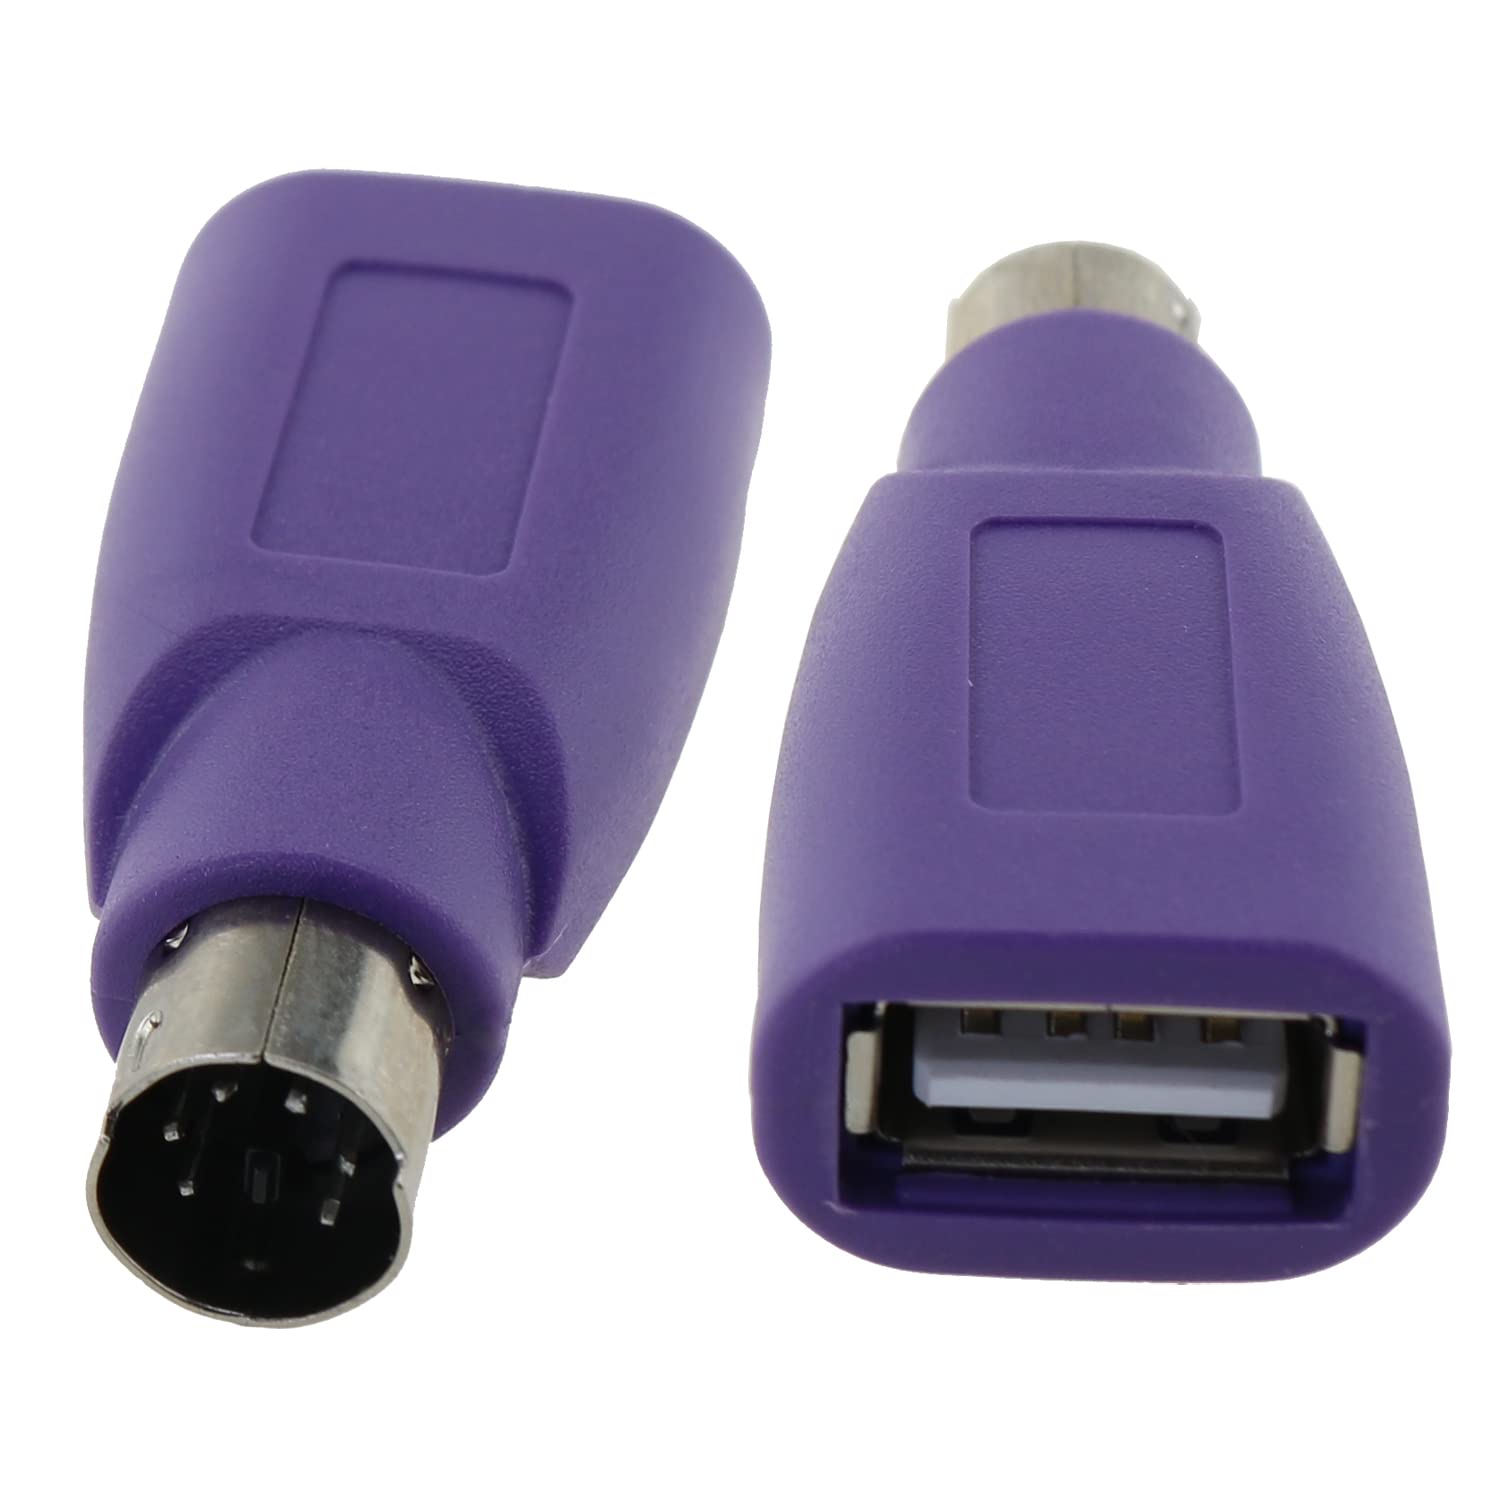 E-outstanding USB to PS2 Adapter, 2PCS USB Female to PS/2 Male Converter Adapter for Mouse Keyboard, Purple